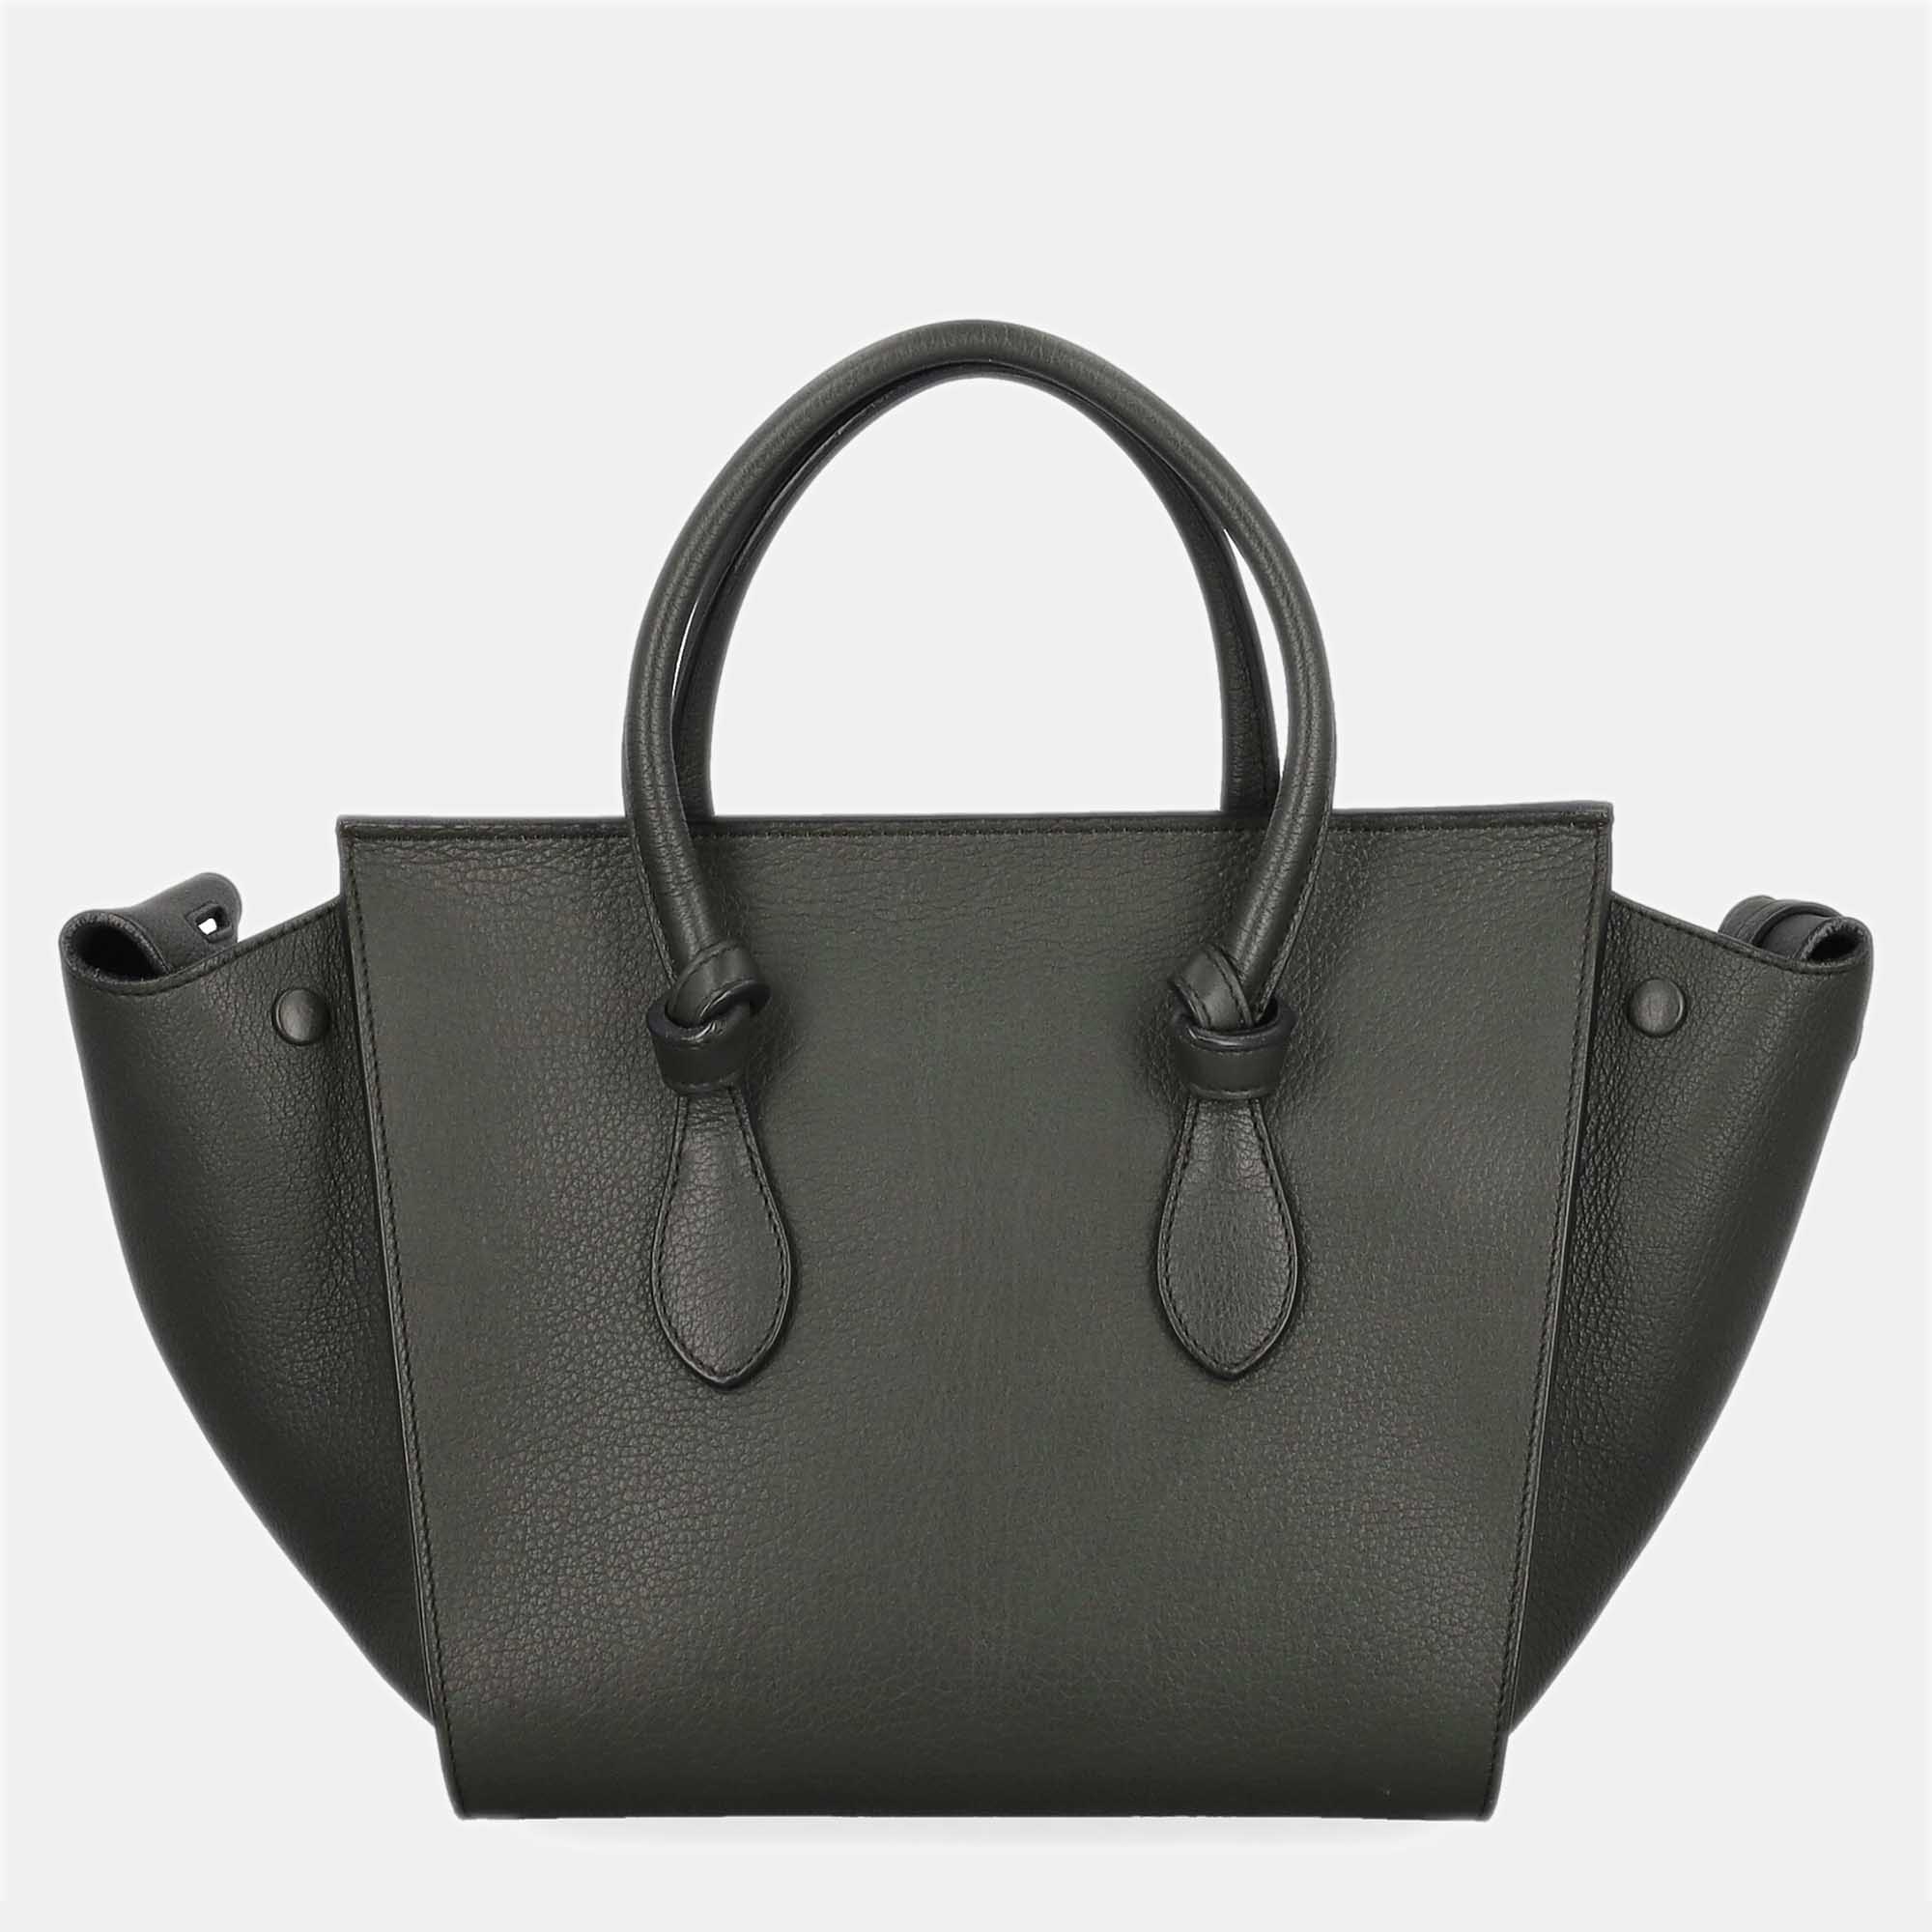 Celine  Women's Leather Tote Bag - Green - One Size